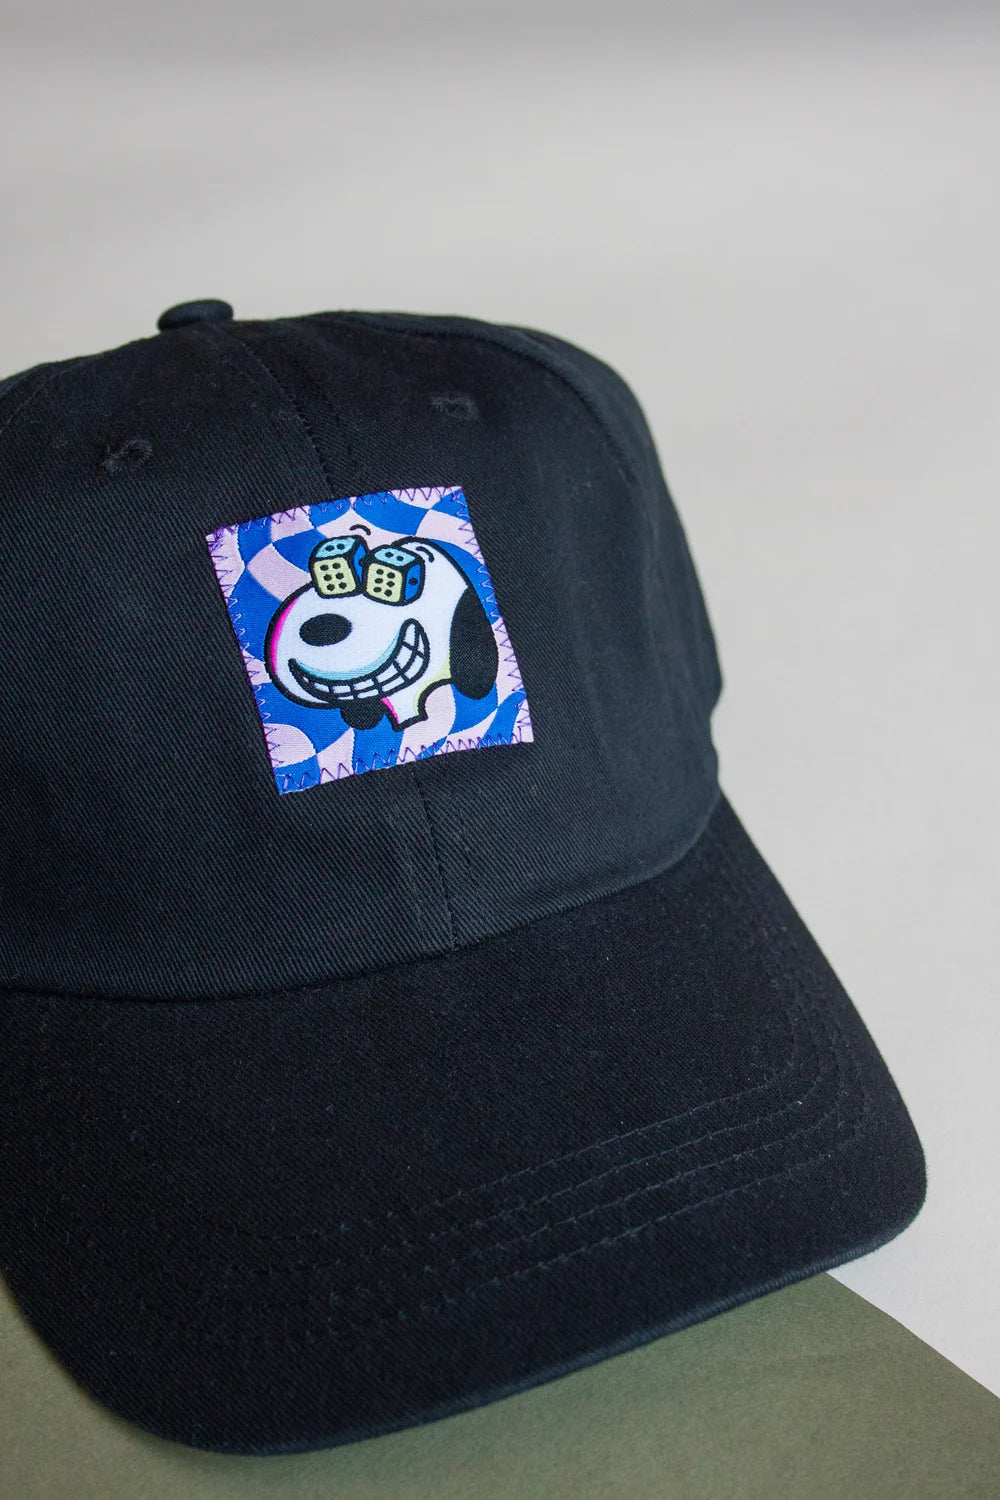 Checkerboard Dog Black Cotton Dad Cap BY FURIOUS CREATIONZ